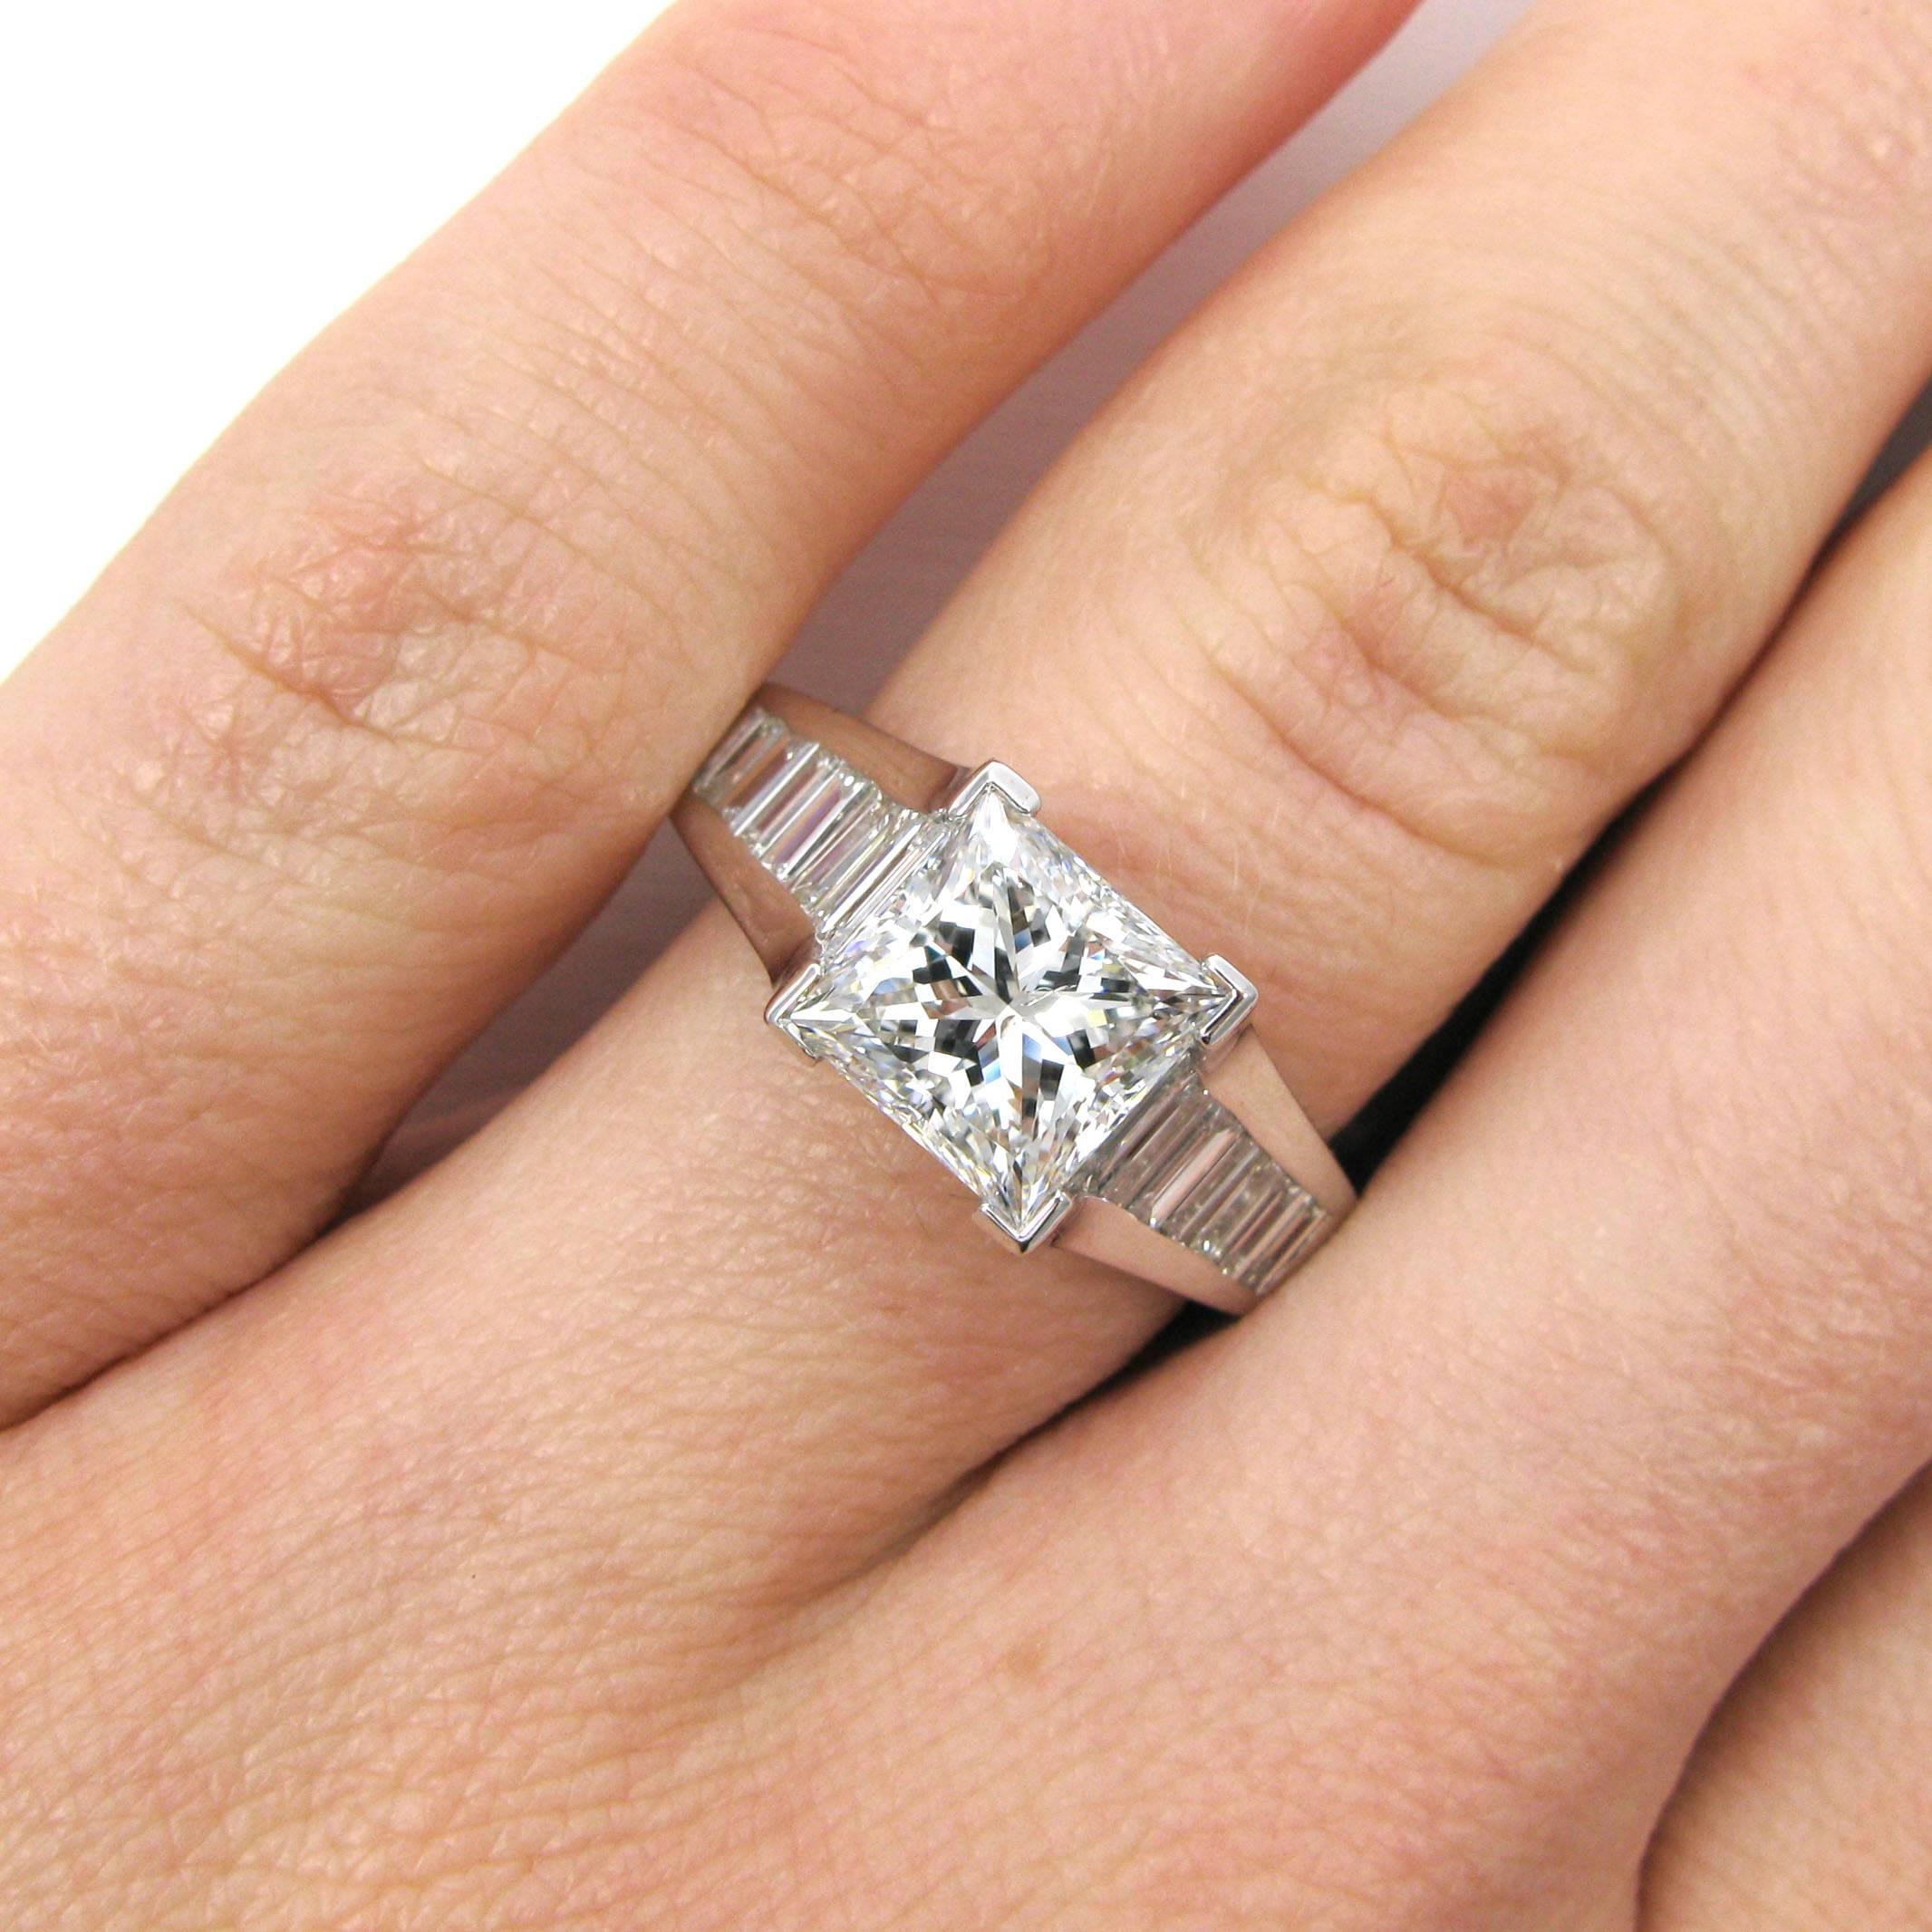 A contemporary ring features a 2.21 carat princess-cut diamond with F color and SI1 clarity. This diamond is set into a heavy 18k white gold mounting with a euro shank and approx. 0.64 carat of straight baguette-cut diamonds channel set down the